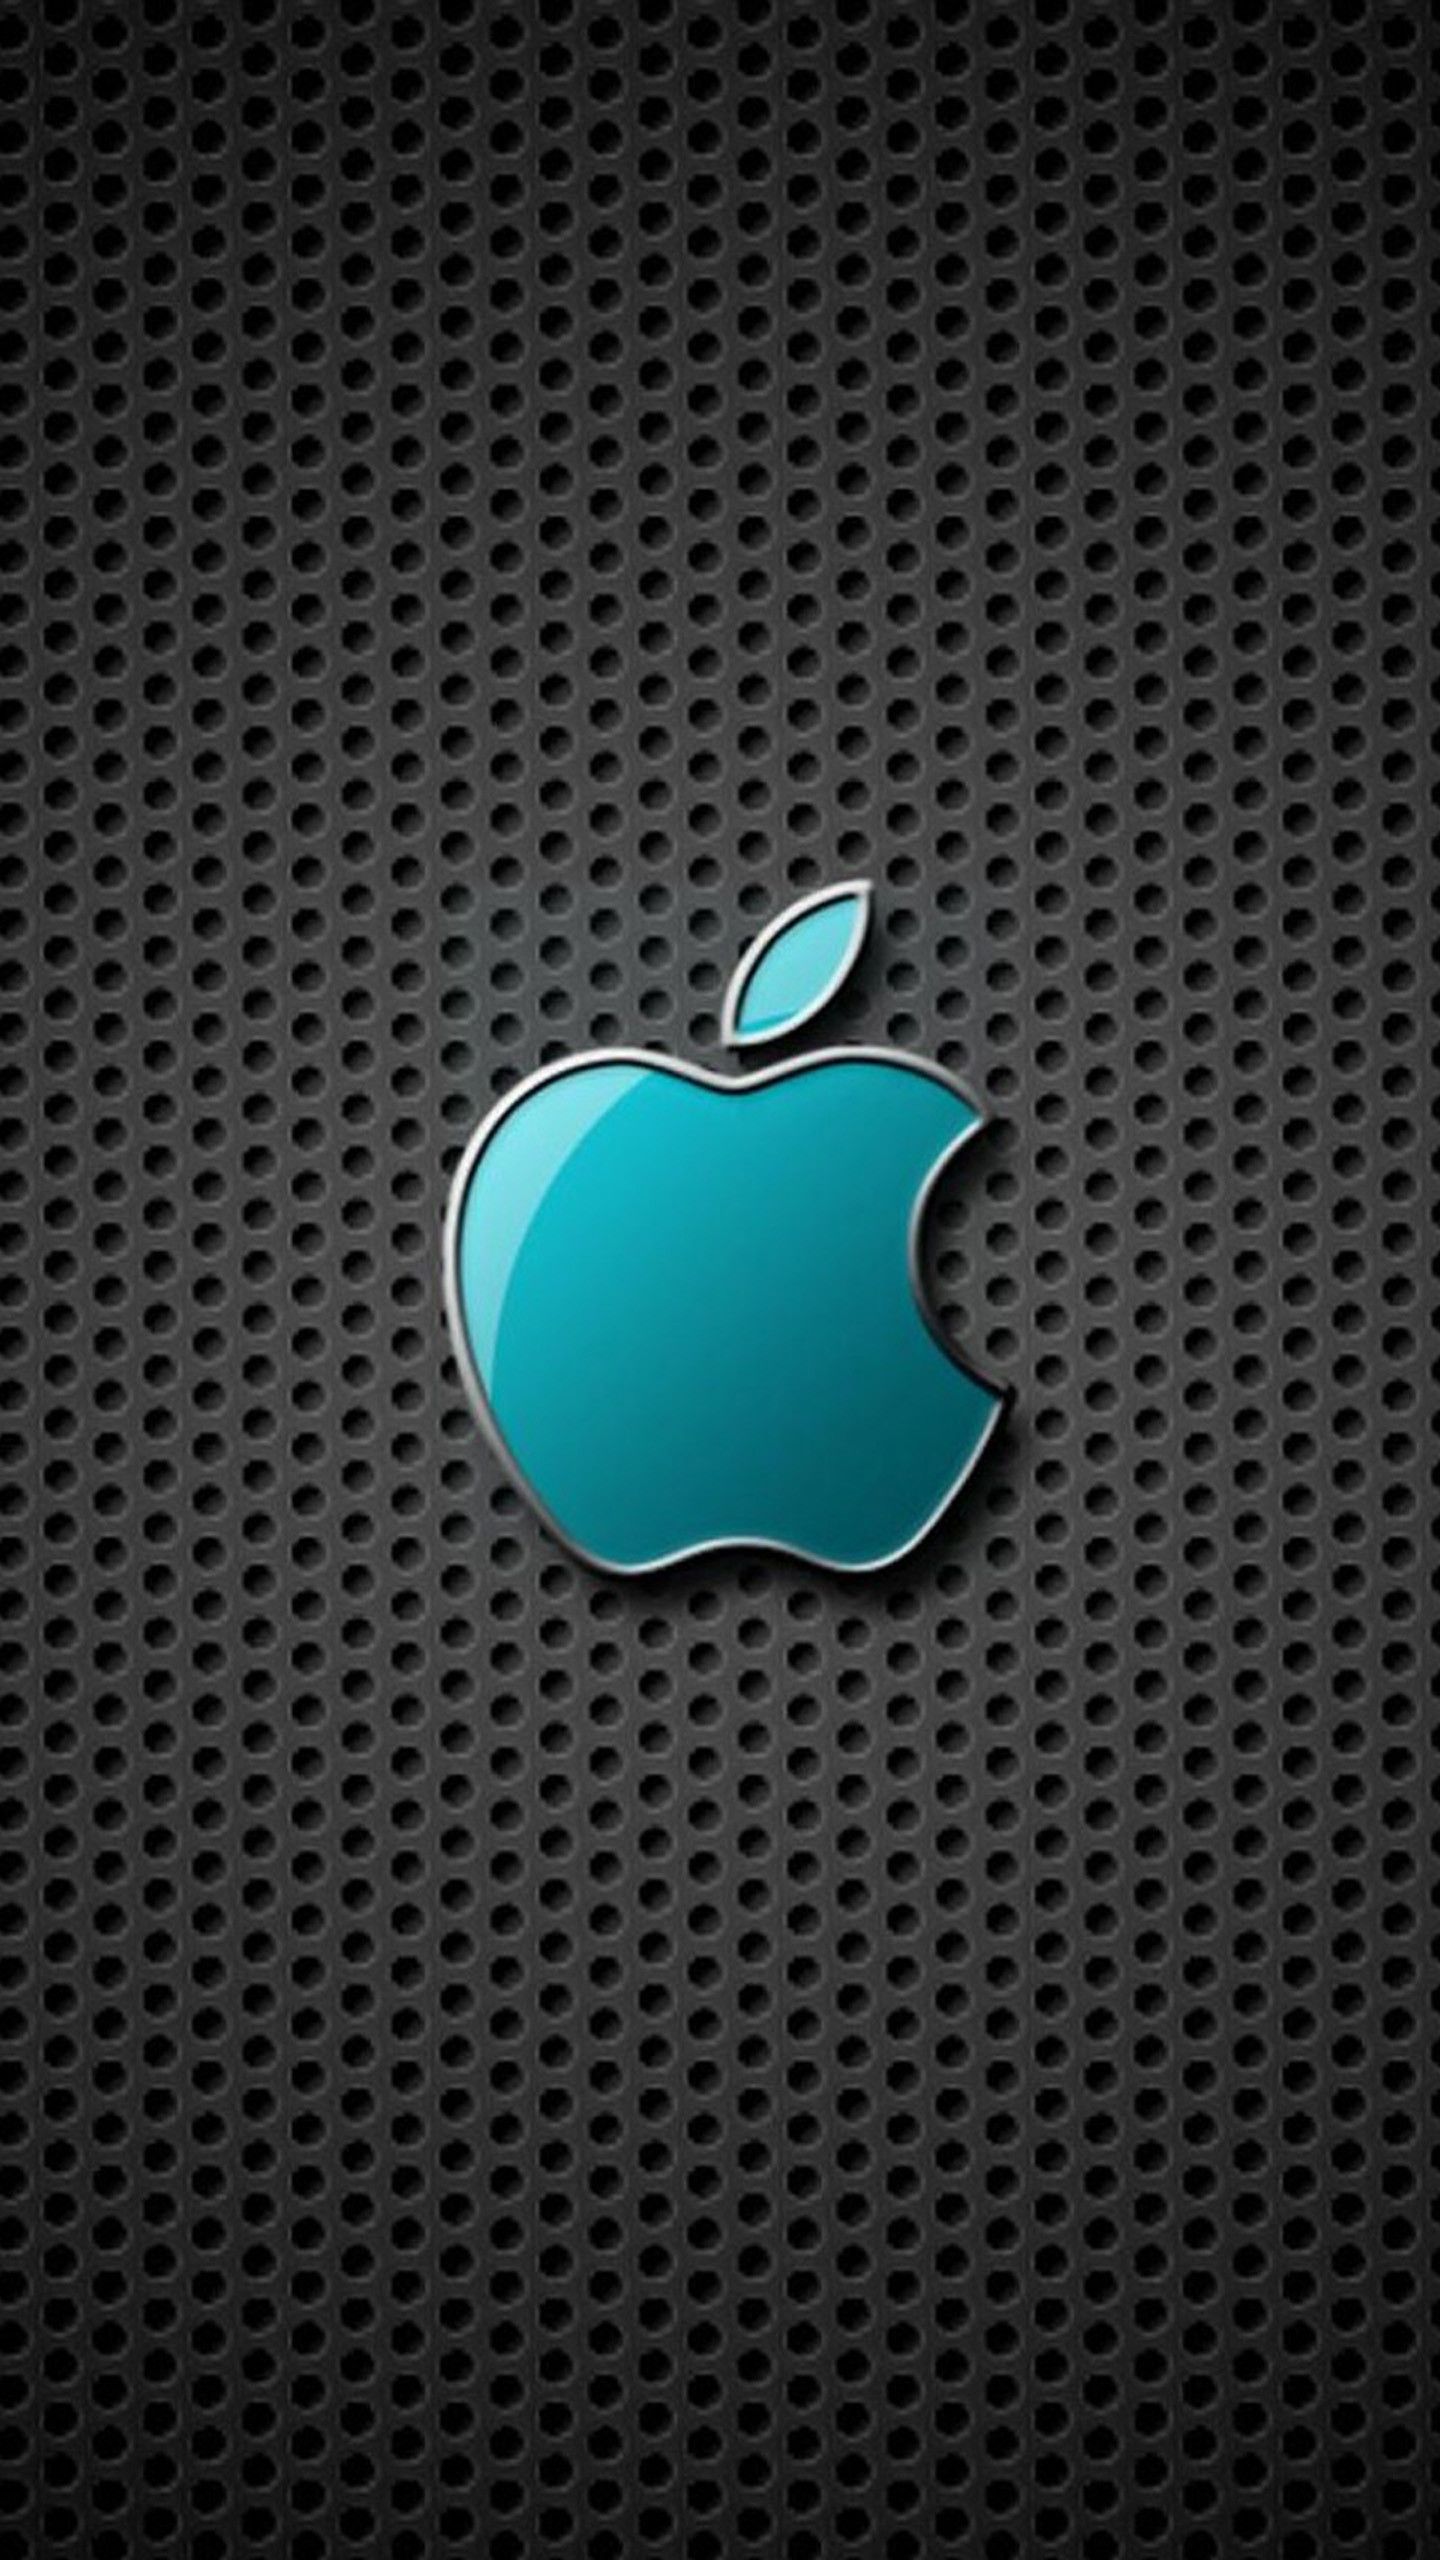 4k Wallpaper Apple Logo HD For Android